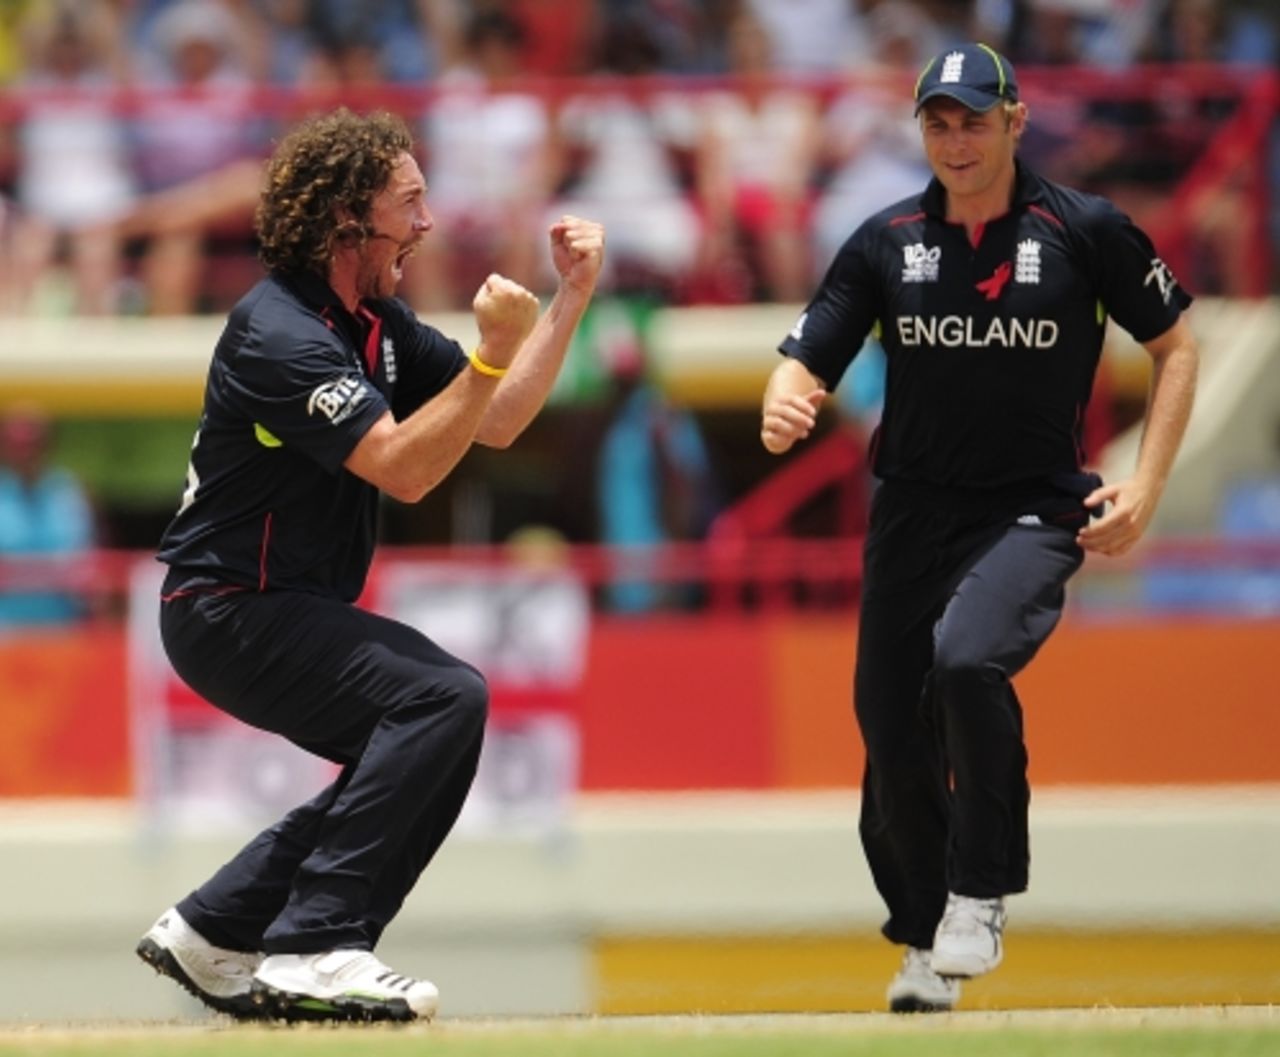 An exuberant  Ryan Sidebottom gave England a strong start with a wicket from his first ball, England v Sri Lanka, World Twenty20, 1st Semi-Final, Gros Islet, May 13, 2010 